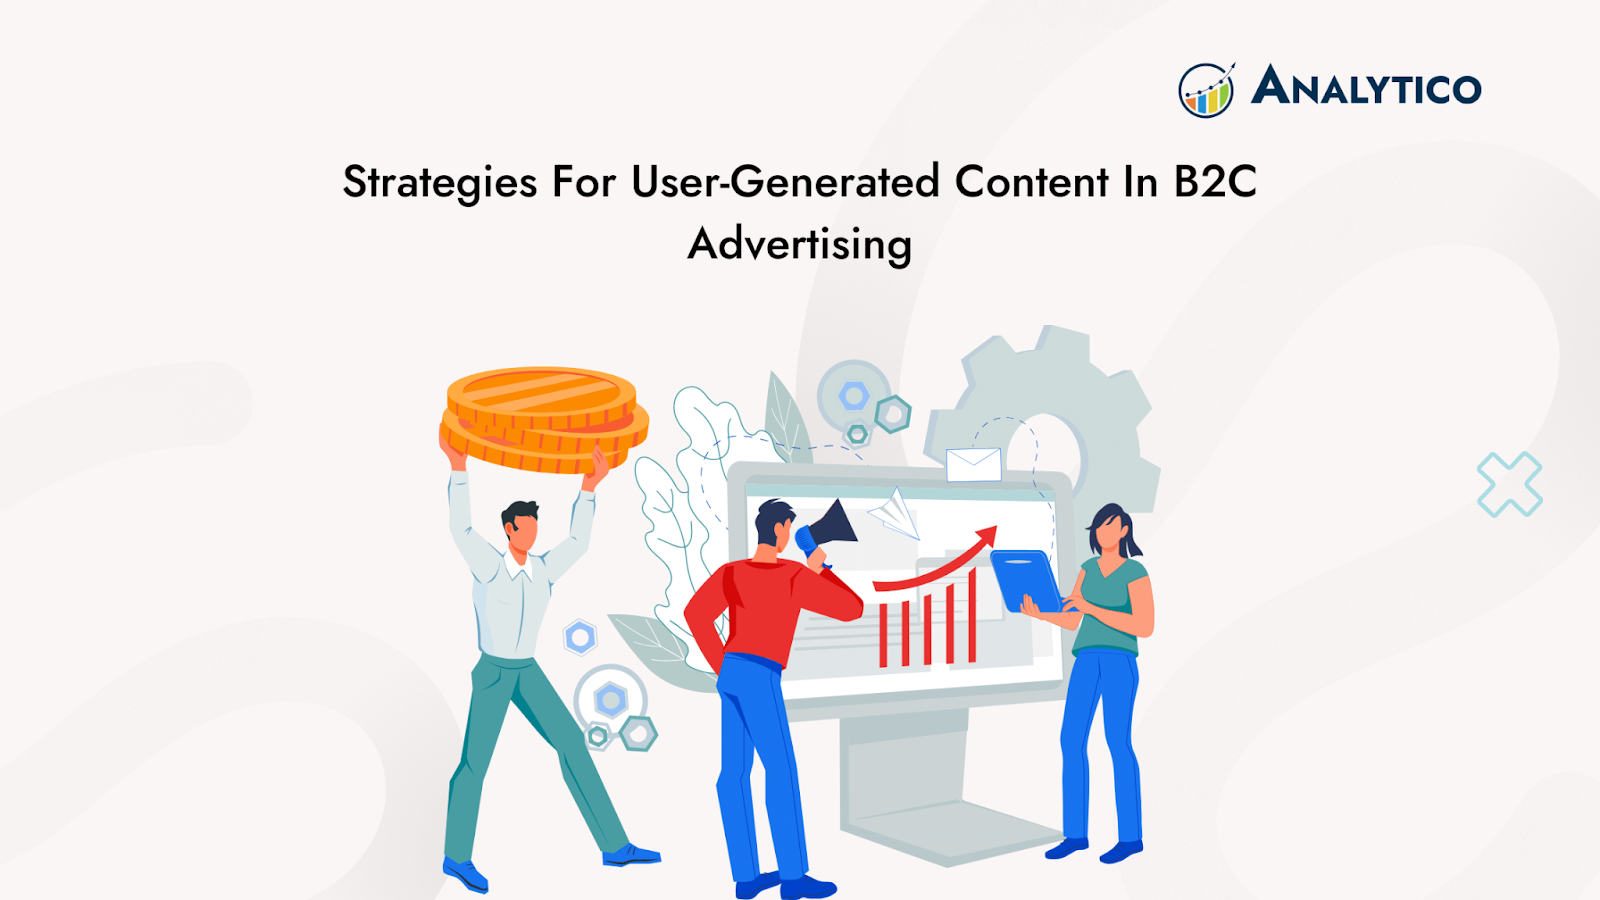 Strategies For User-Generated Content In B2C Advertising